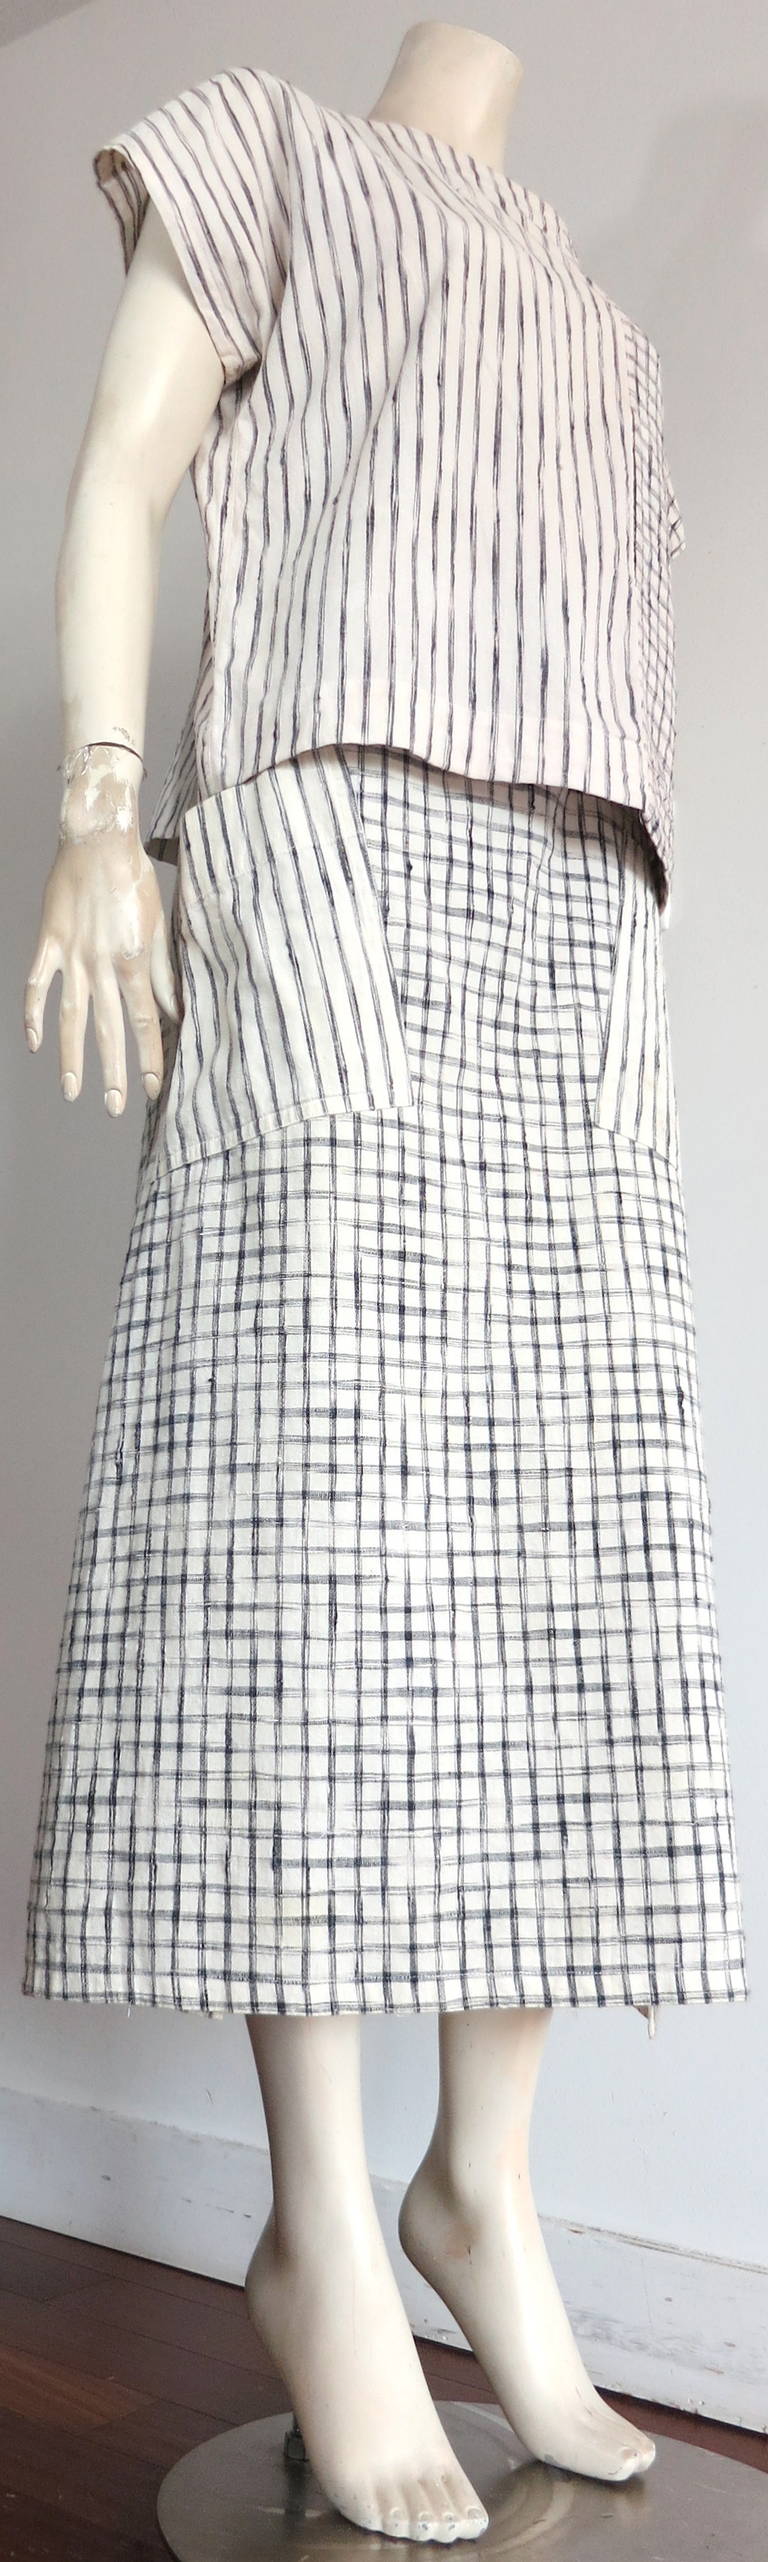 1980's ISSEY MIYAKE Plantation woven ikat 2pc. skirt set.

This wonderful 2pc. skirt and top set was designed by Issey Miyake in Japan during the 1980's under his Plantation label.

Natural woven, cotton & linen, Ikat style stripes and checks